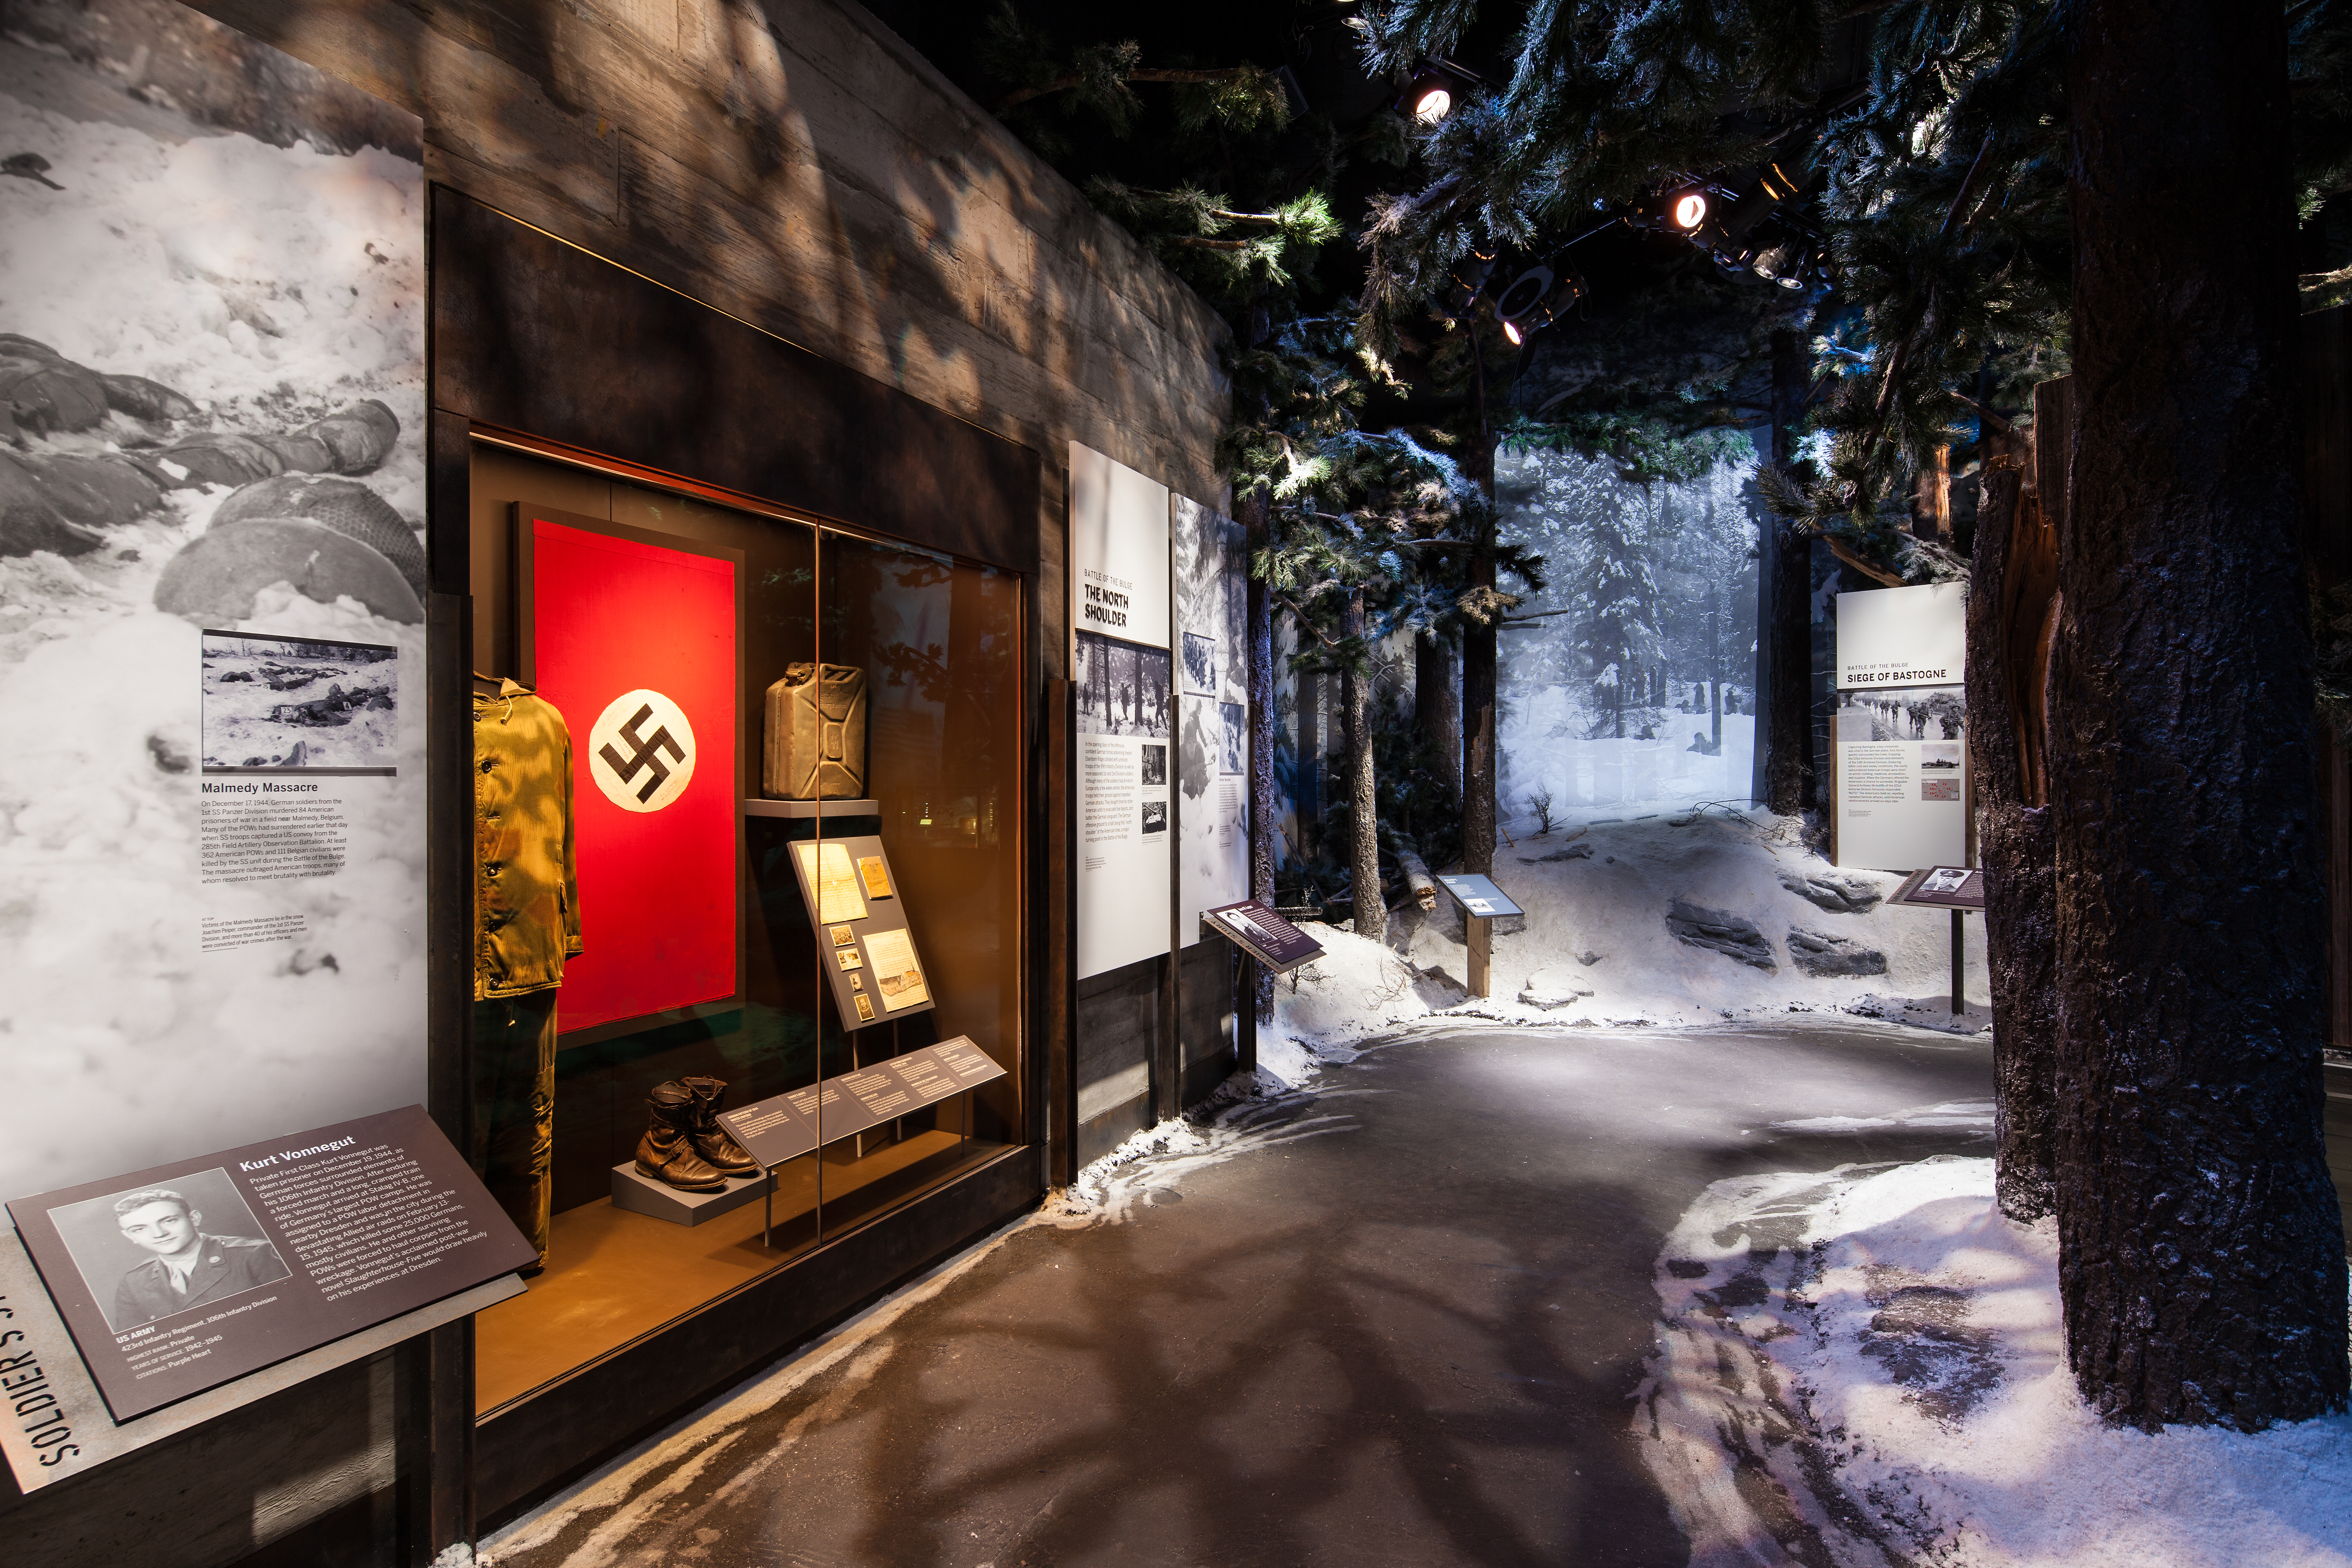 Battle of the Bulge Gallery, Nazi flag, Road to Berlin